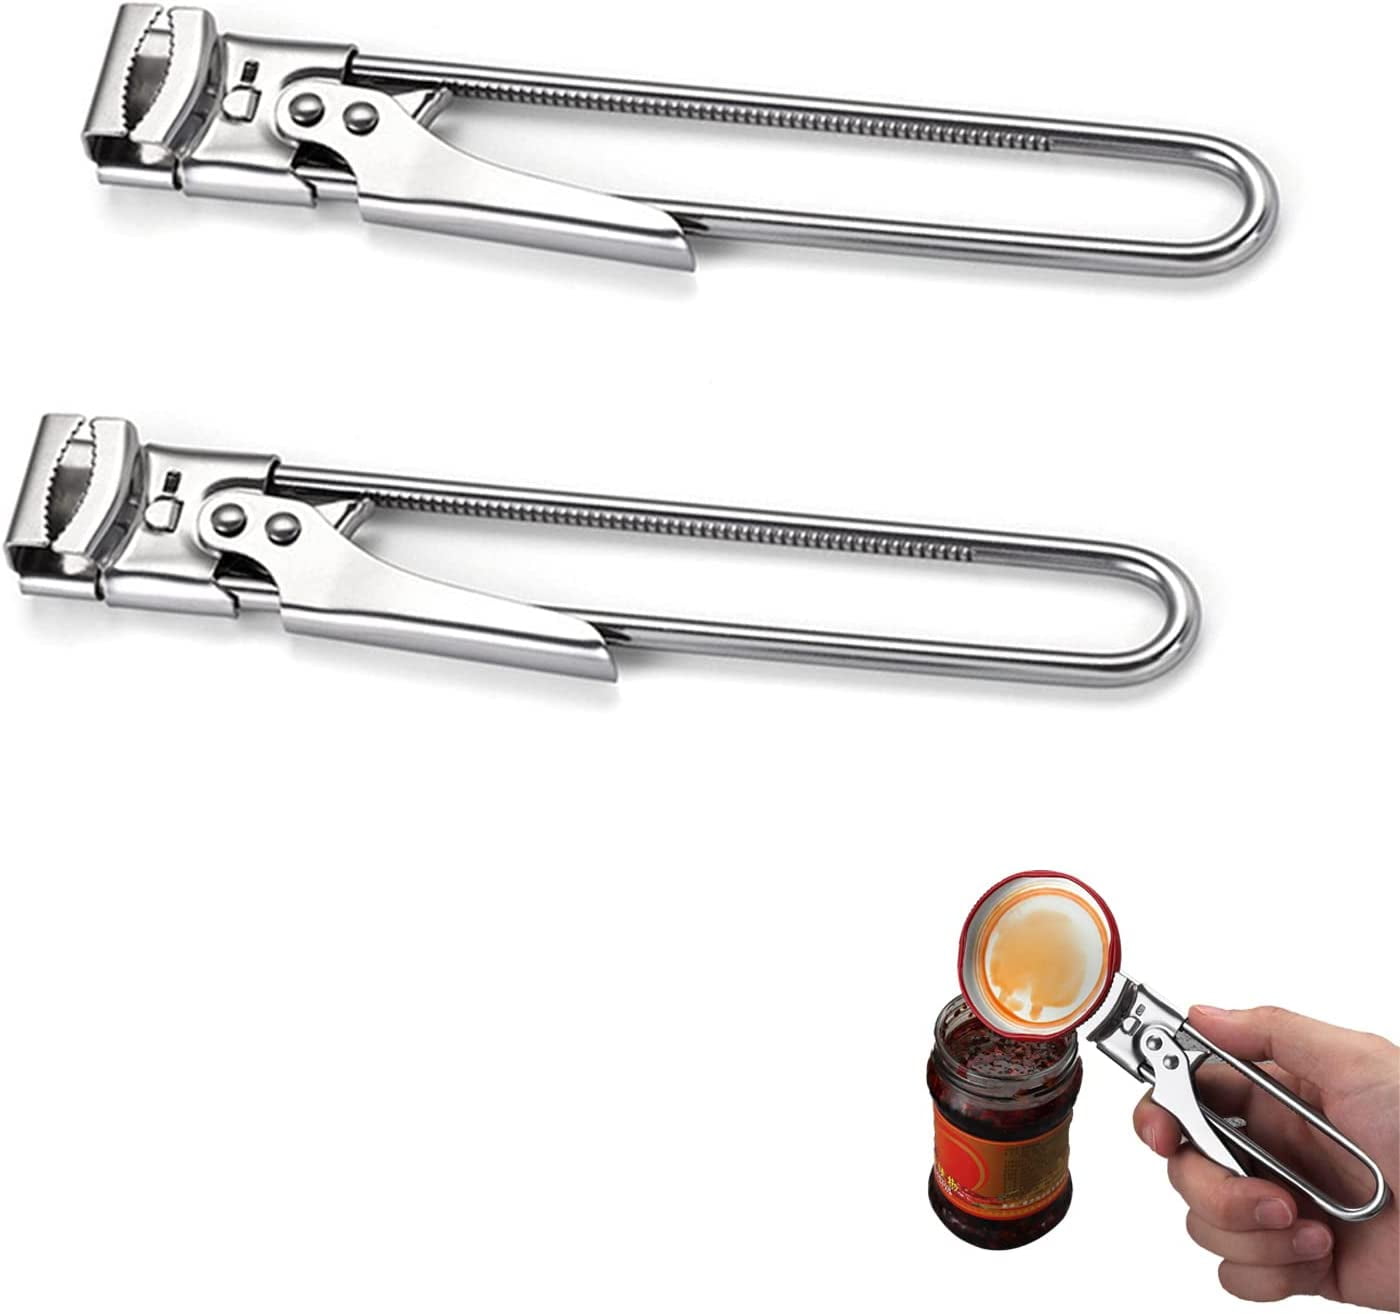 2Pcs Commercial Can Opener Heavy Duty Hand Can Opener Manual